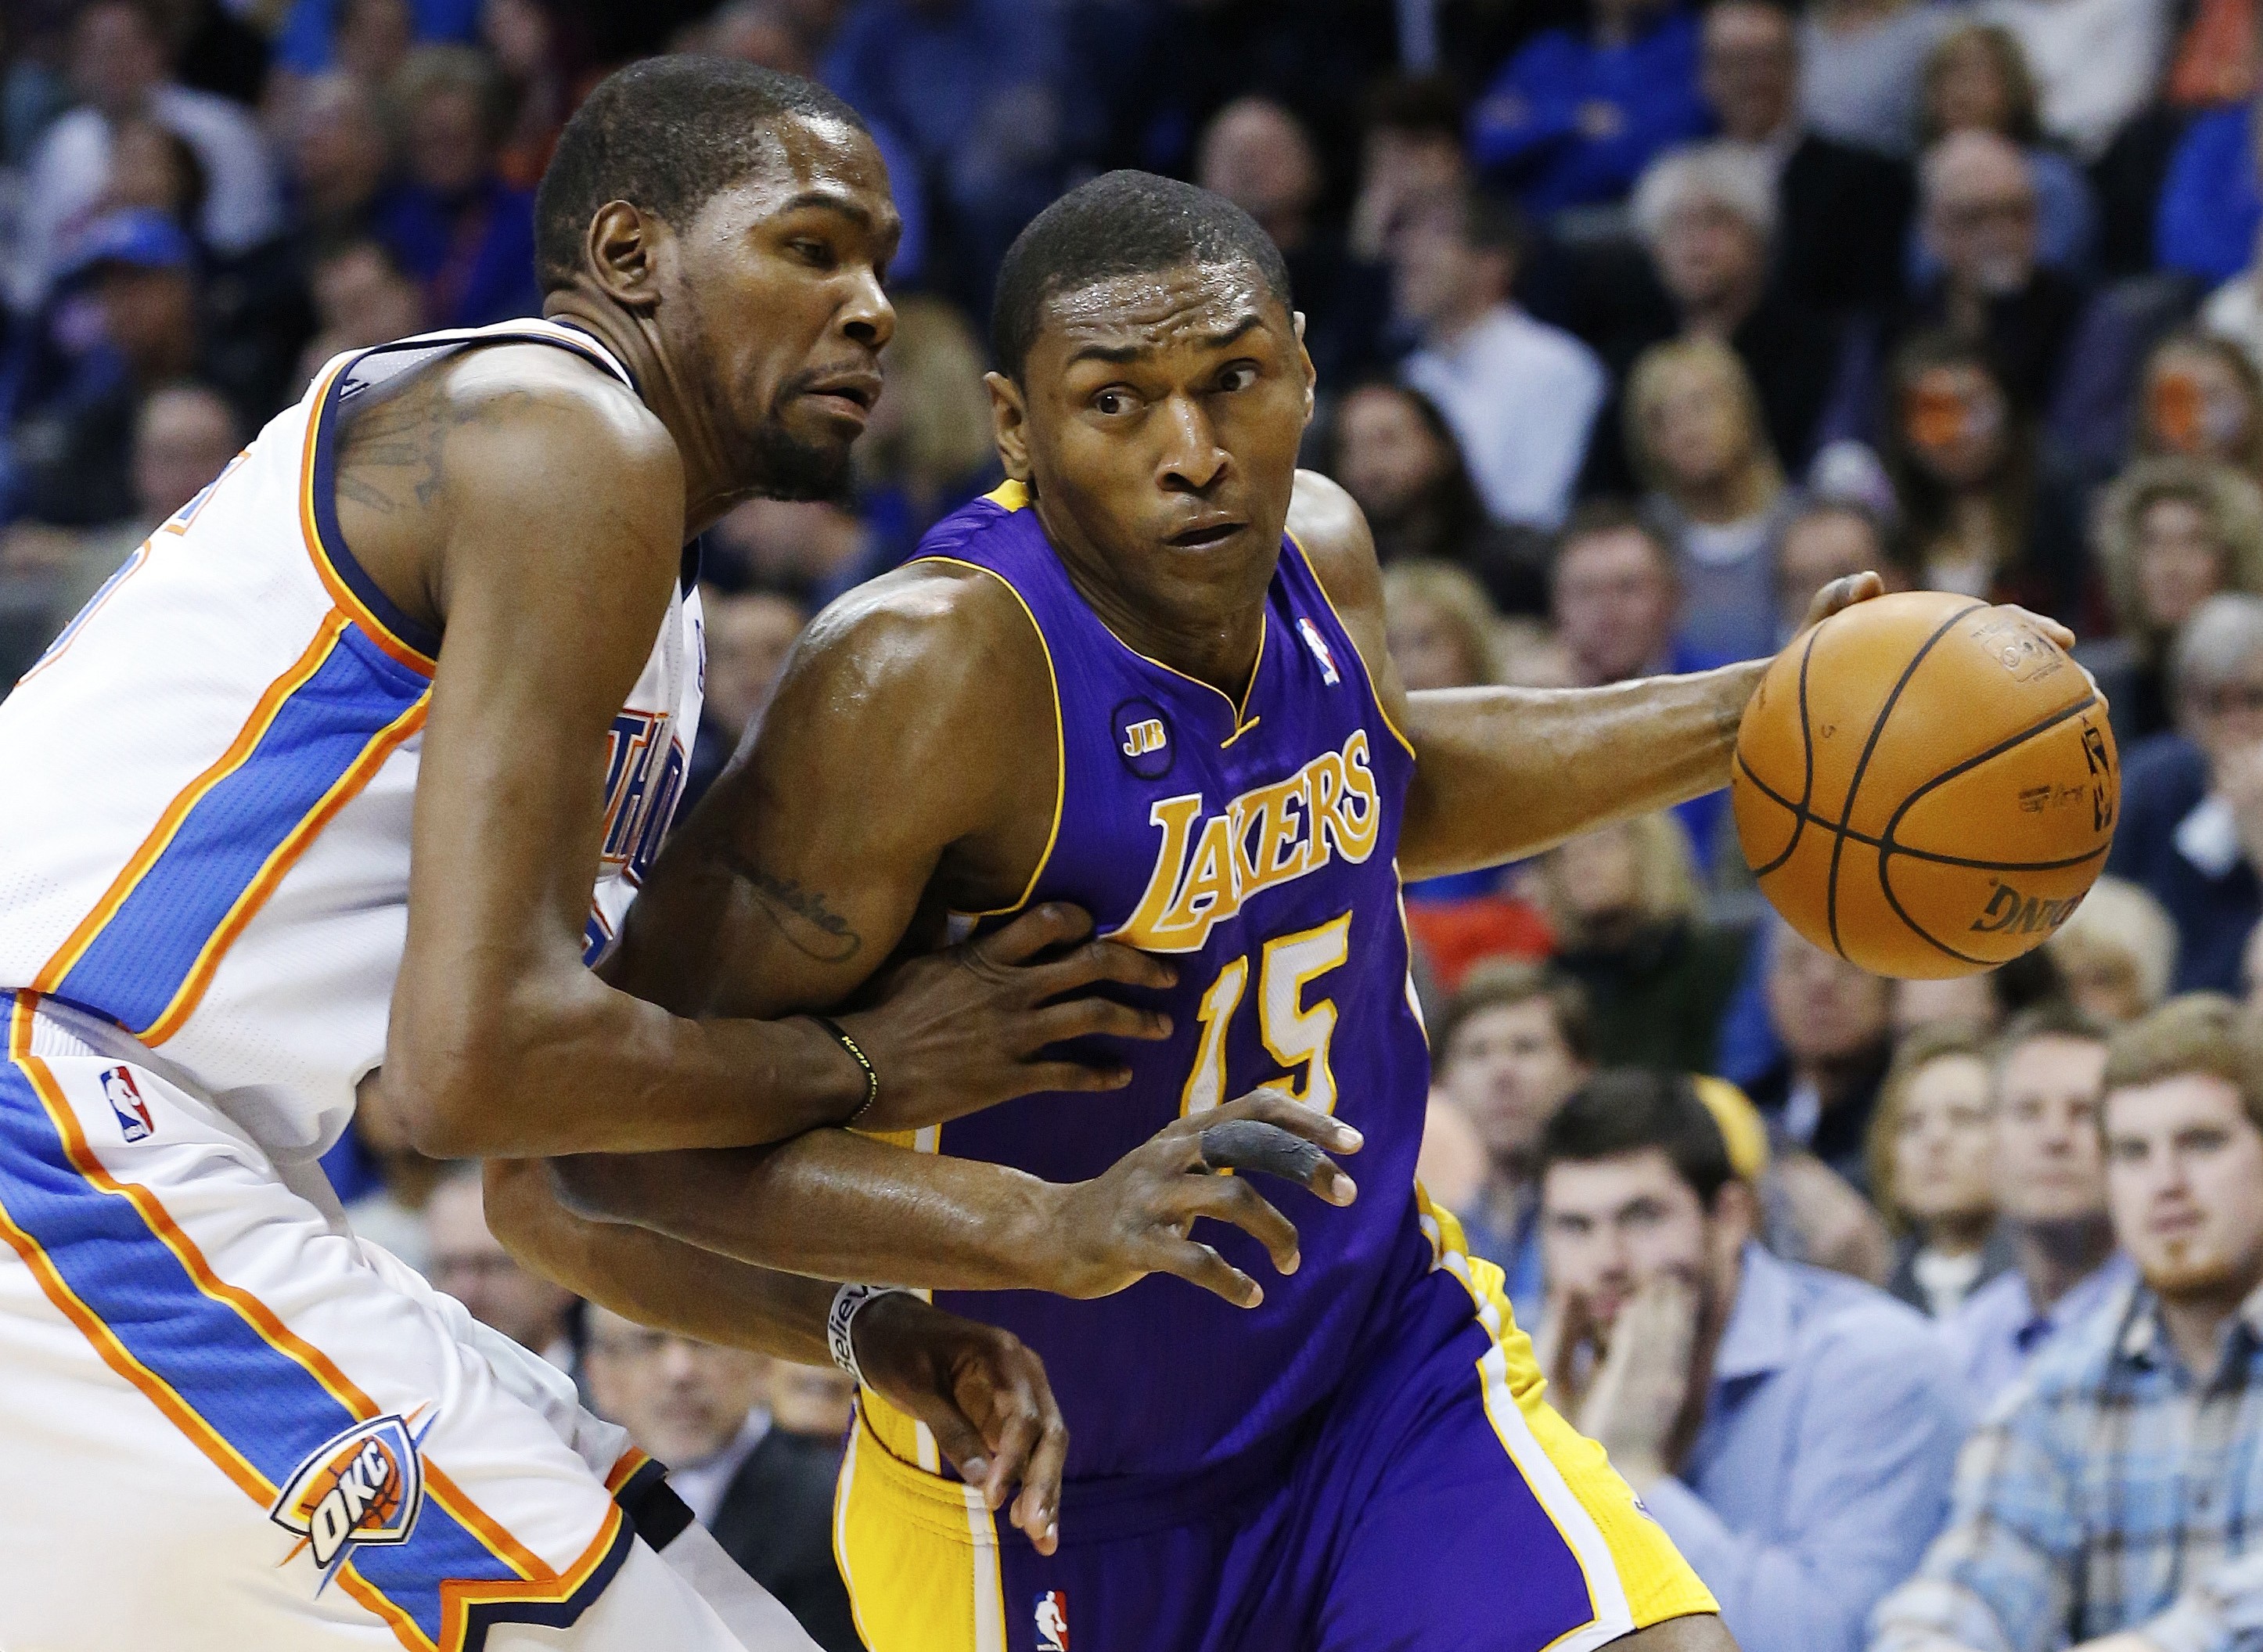 Los Angeles Lakers forward Metta World Peace (15) drives around Oklahoma City Thunder forward Kevin Durant (35) in the first quarter of an NBA basketball game in Oklahoma City, Tuesday, March 5, 2013. Photo: AP